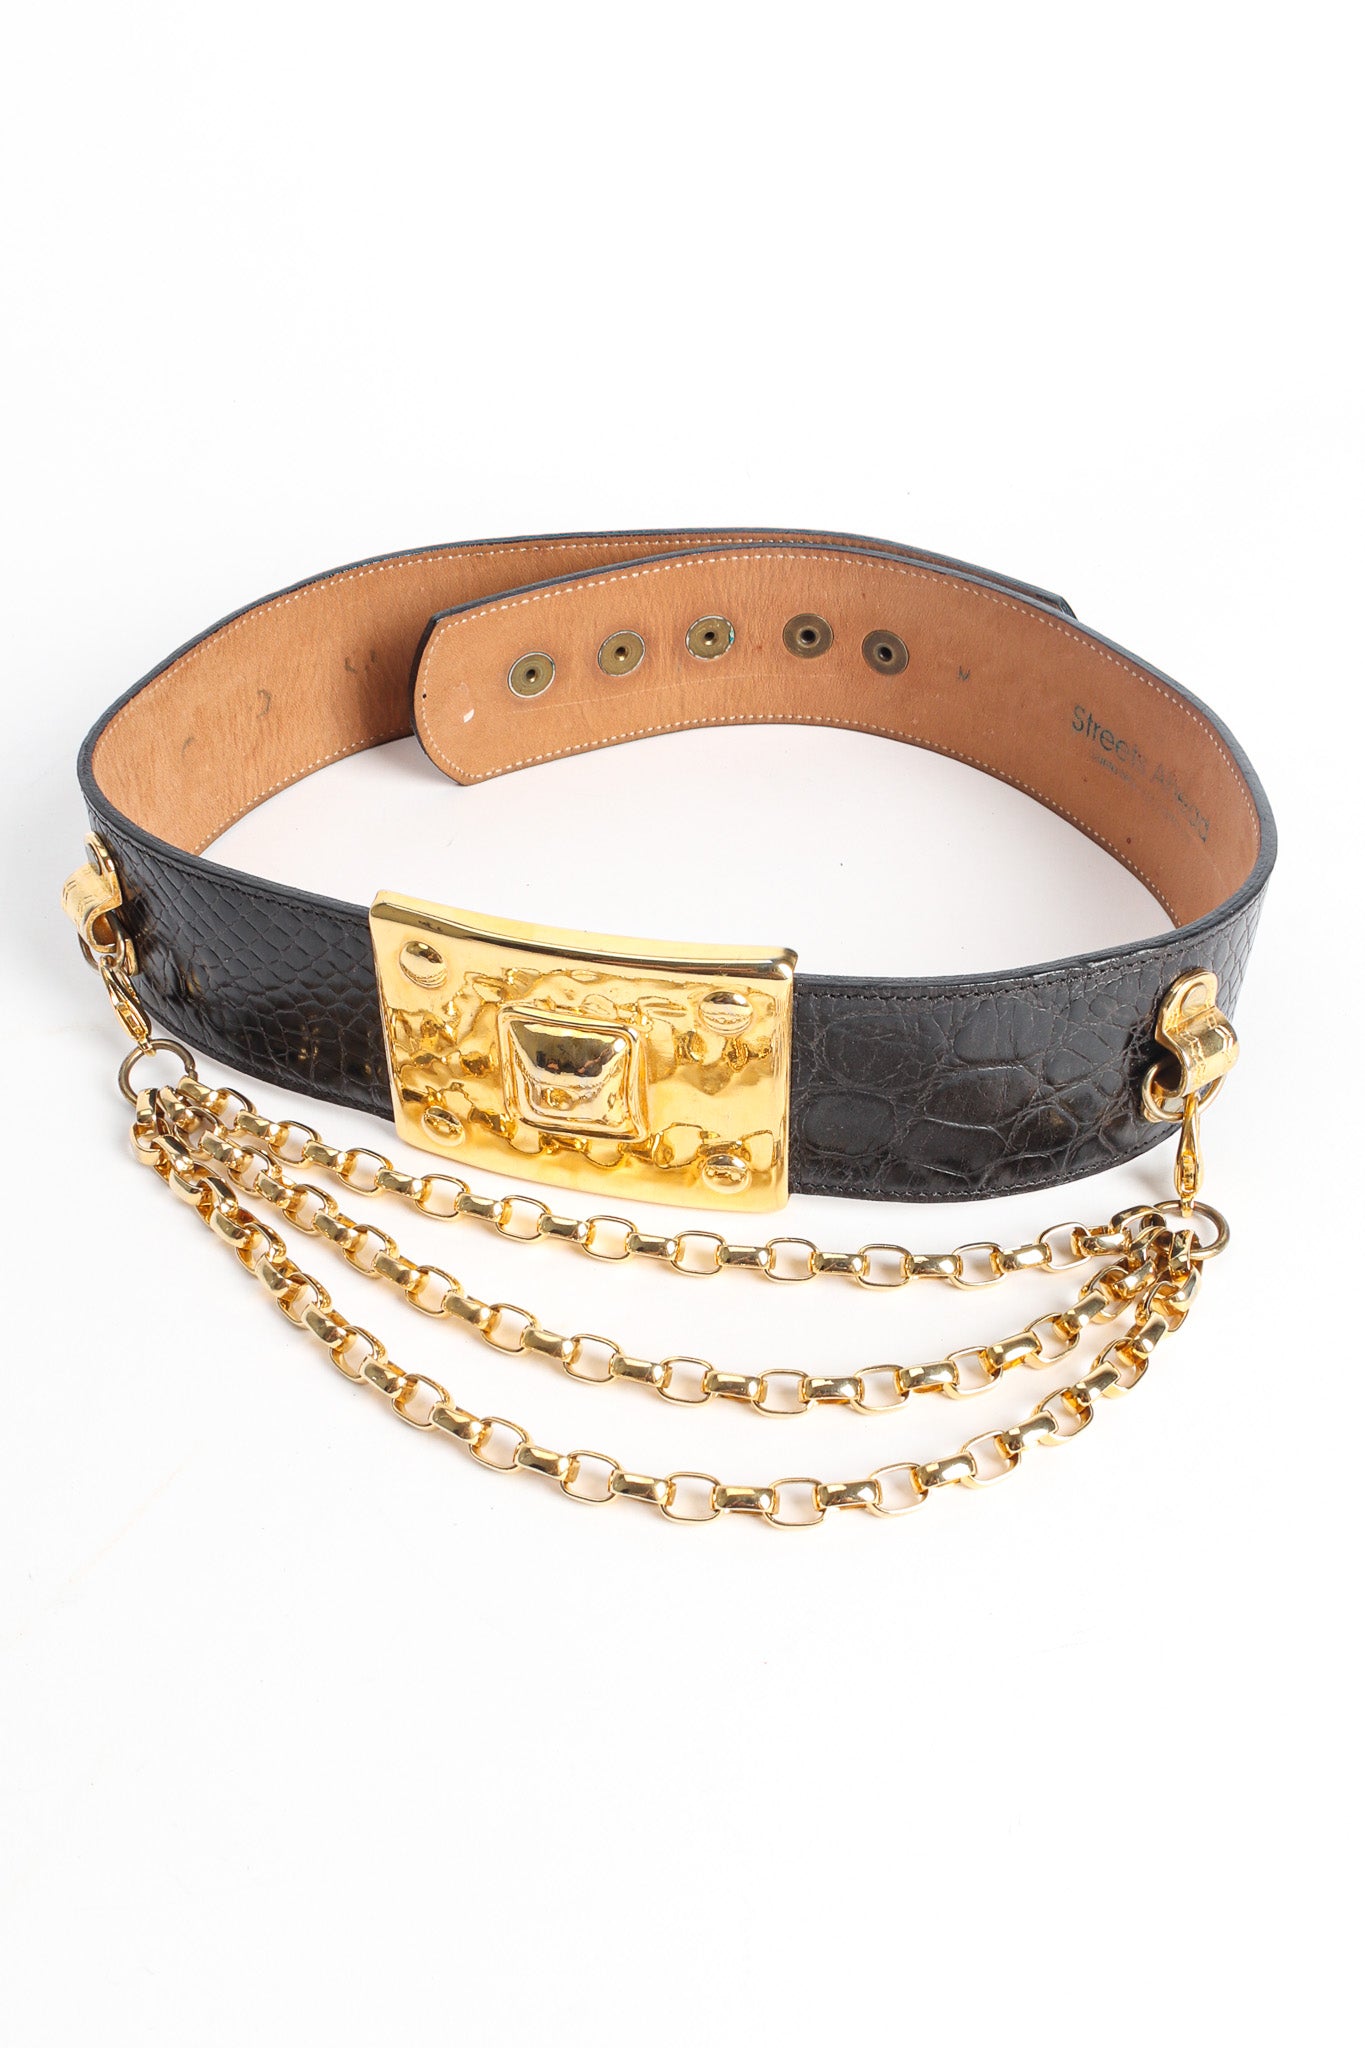 leather belt with draped chain by Streets Ahead flat lay @recessla